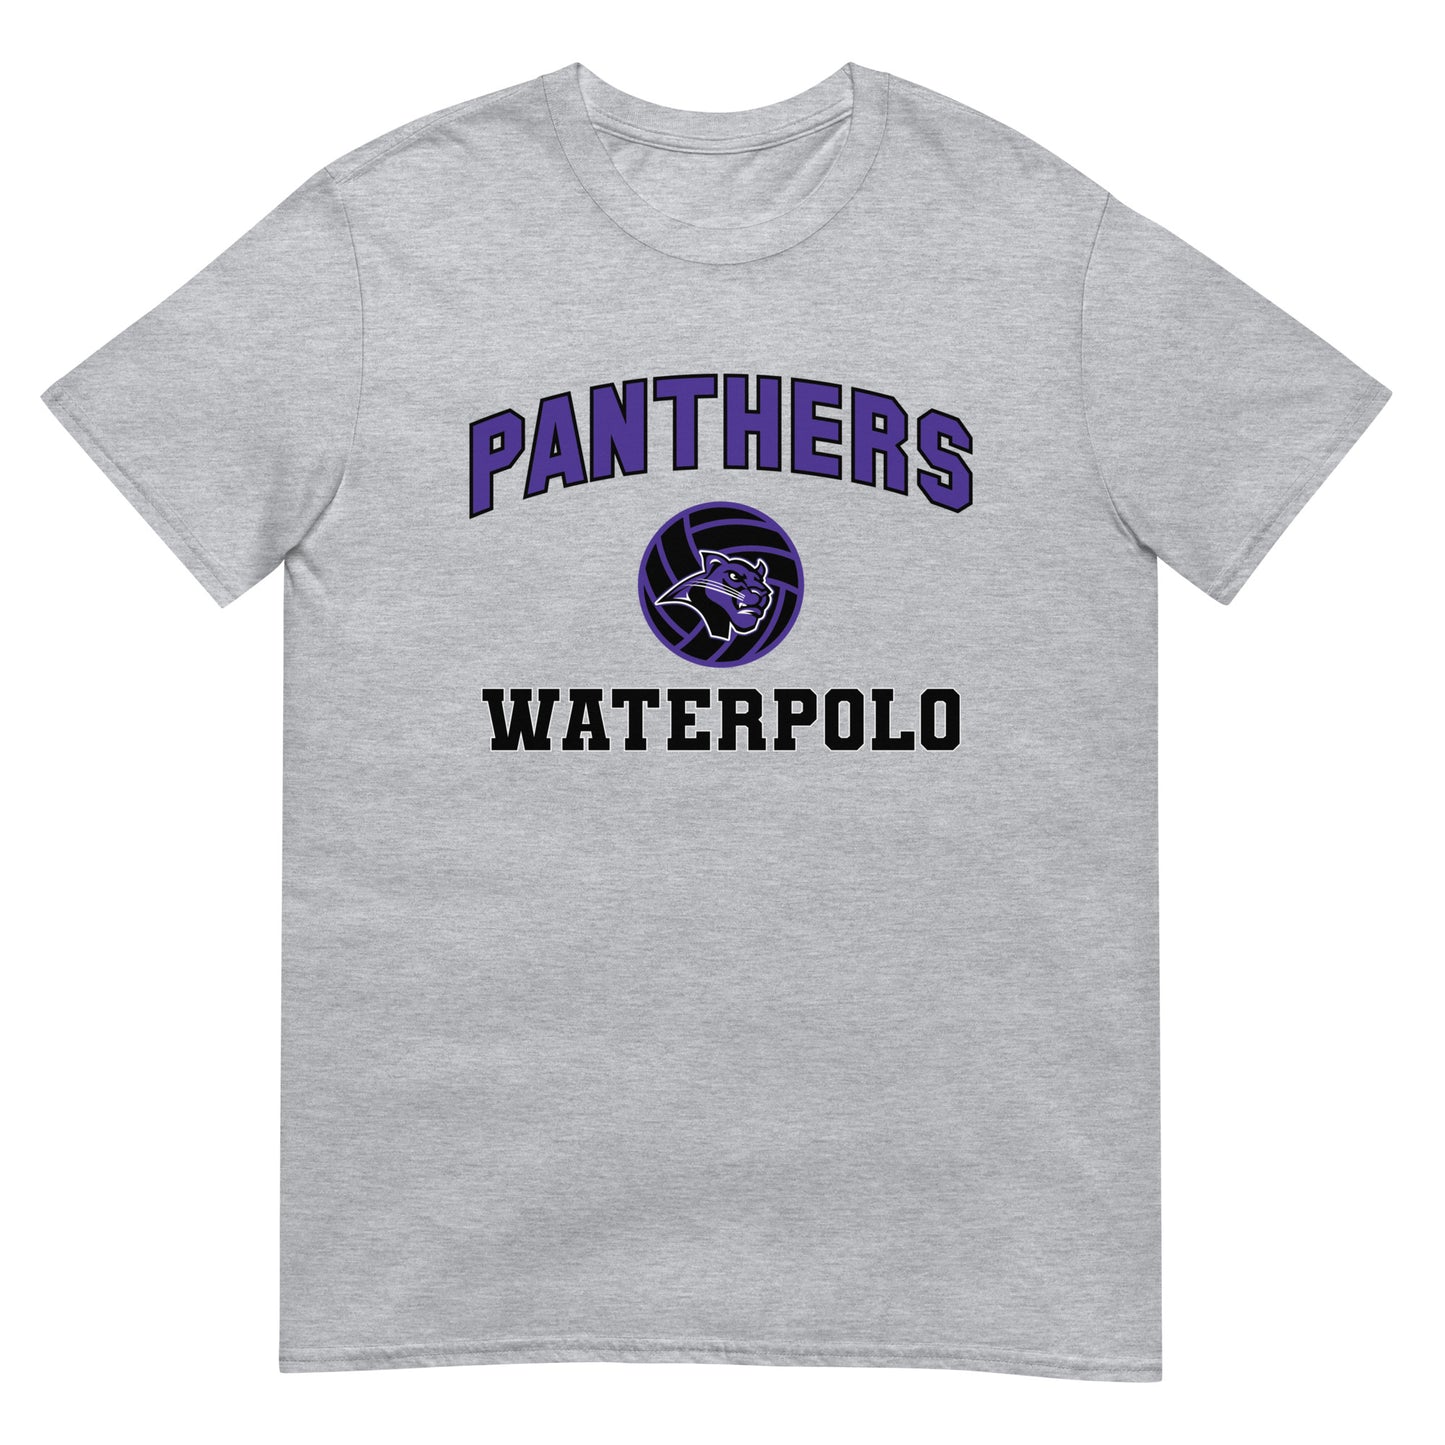 Panthers Waterpolo Short-Sleeve Unisex T-Shirt